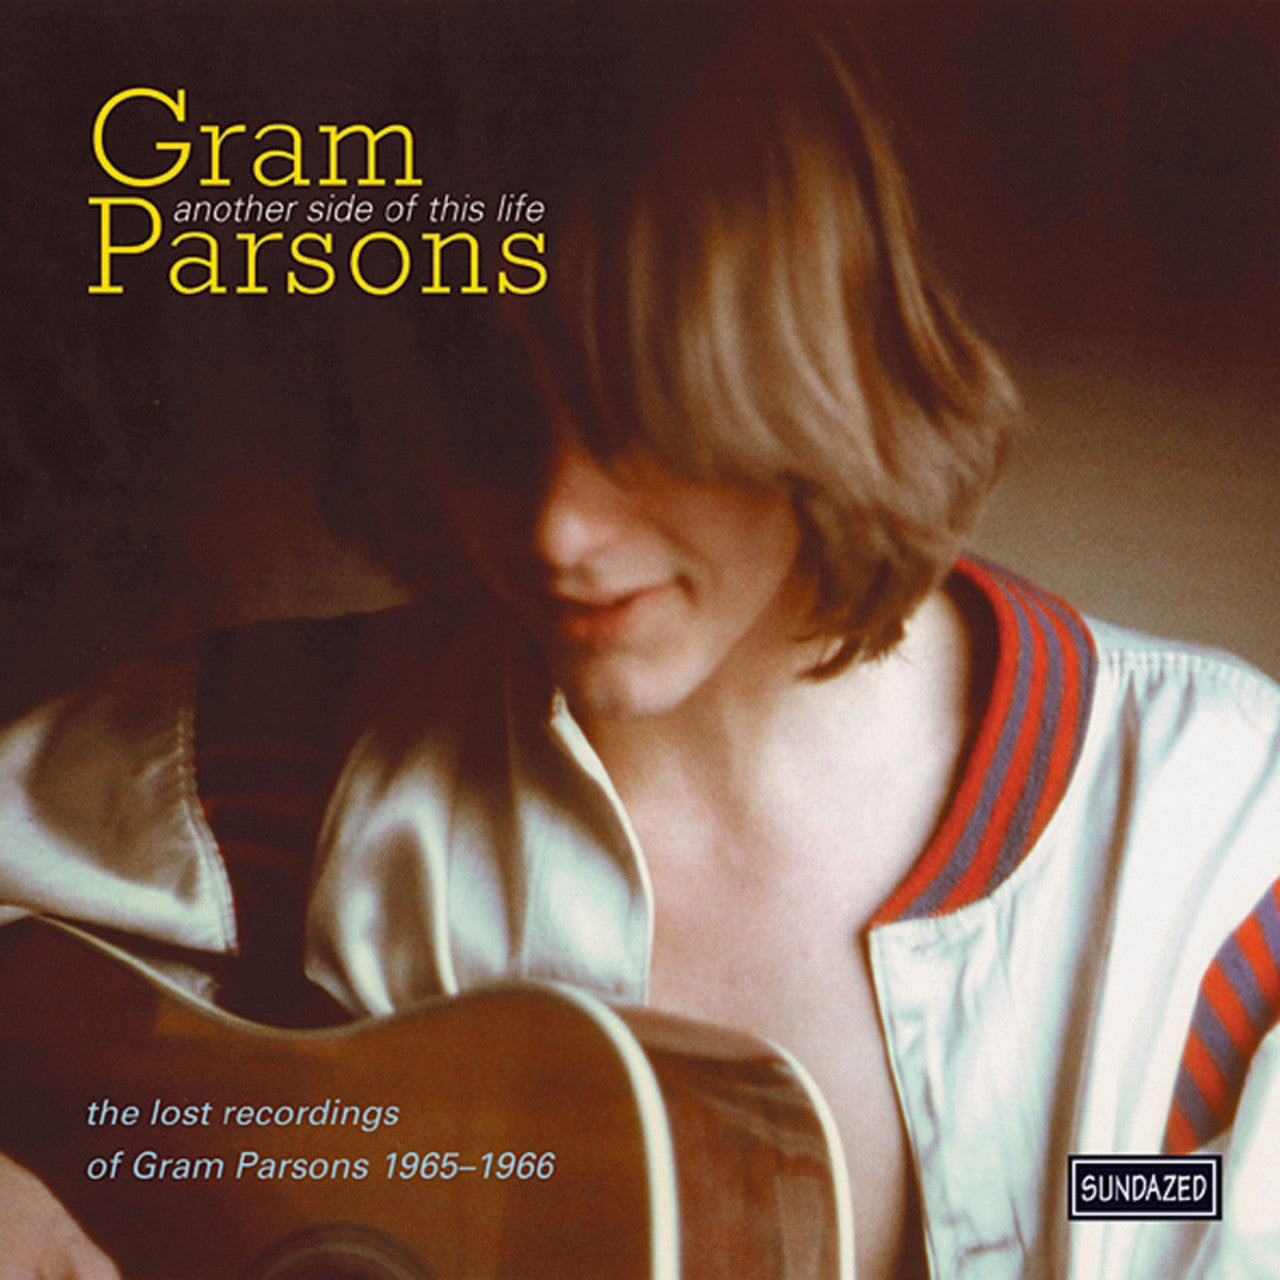 Parsons, Gram "Another Side of This Life" ["Sky Blue" Vinyl]